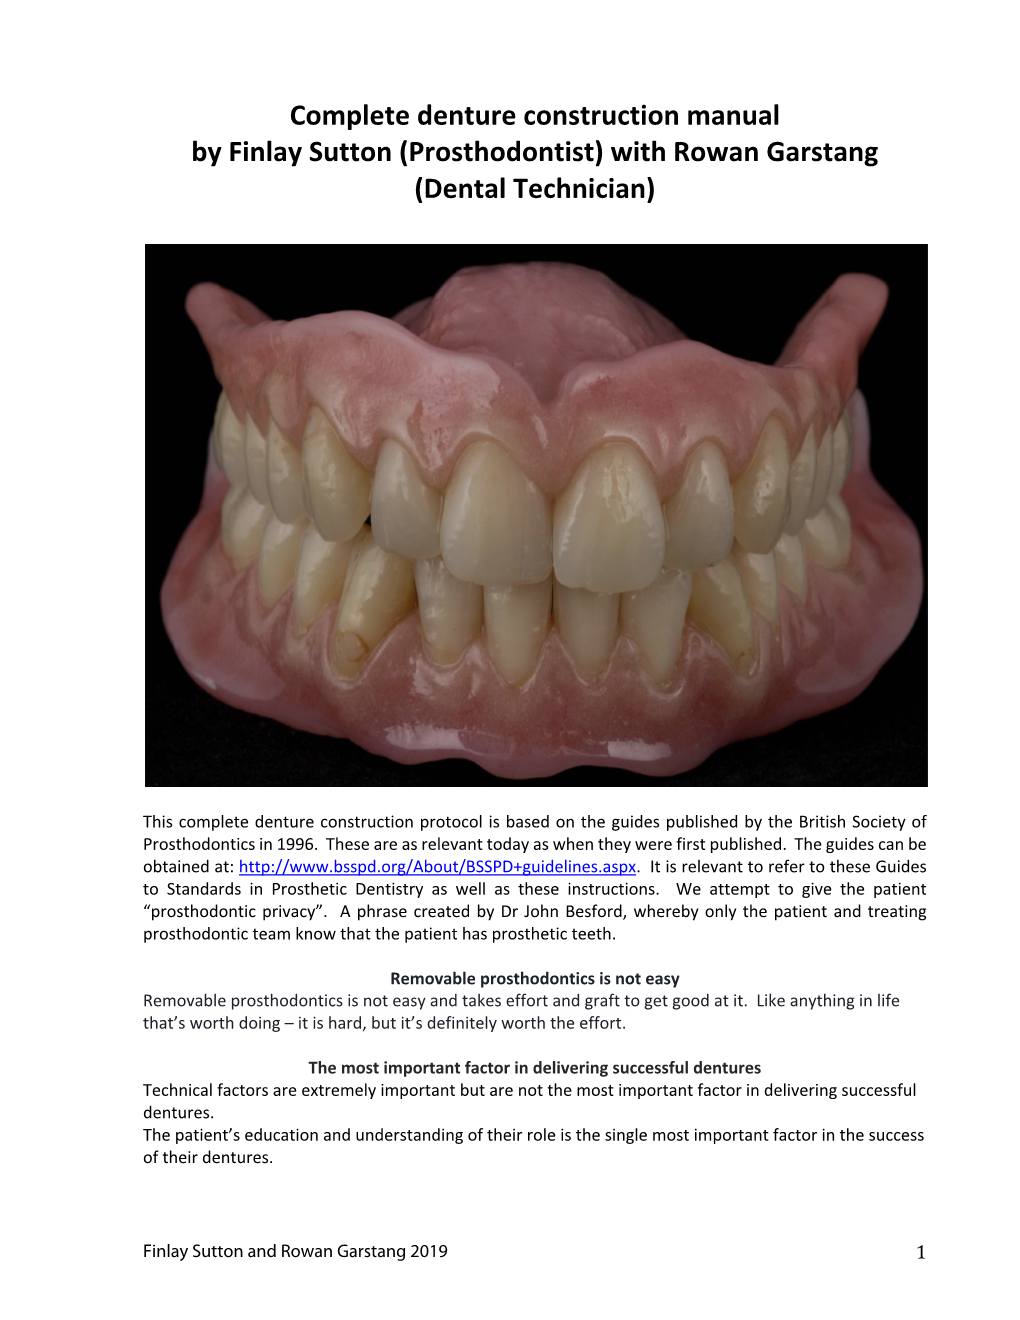 Complete Denture Construction Manual by Finlay Sutton (Prosthodontist) with Rowan Garstang (Dental Technician)